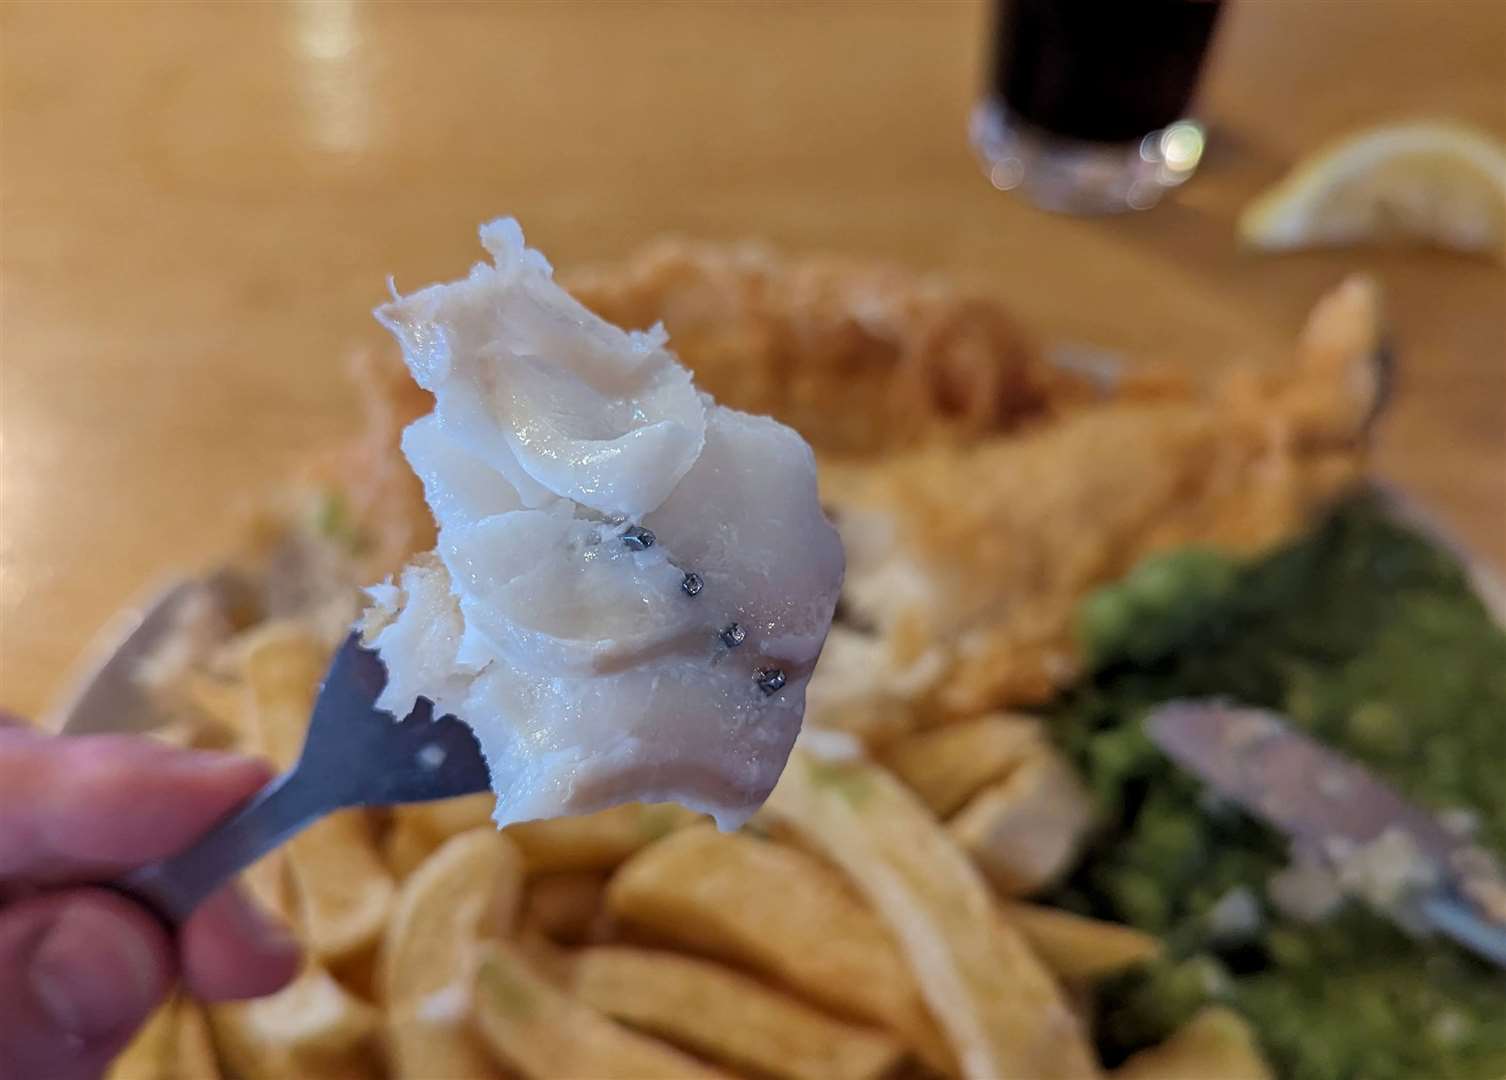 Juicy flakes of cod went down a treat – but our man was beaten by the batter and mound of chips